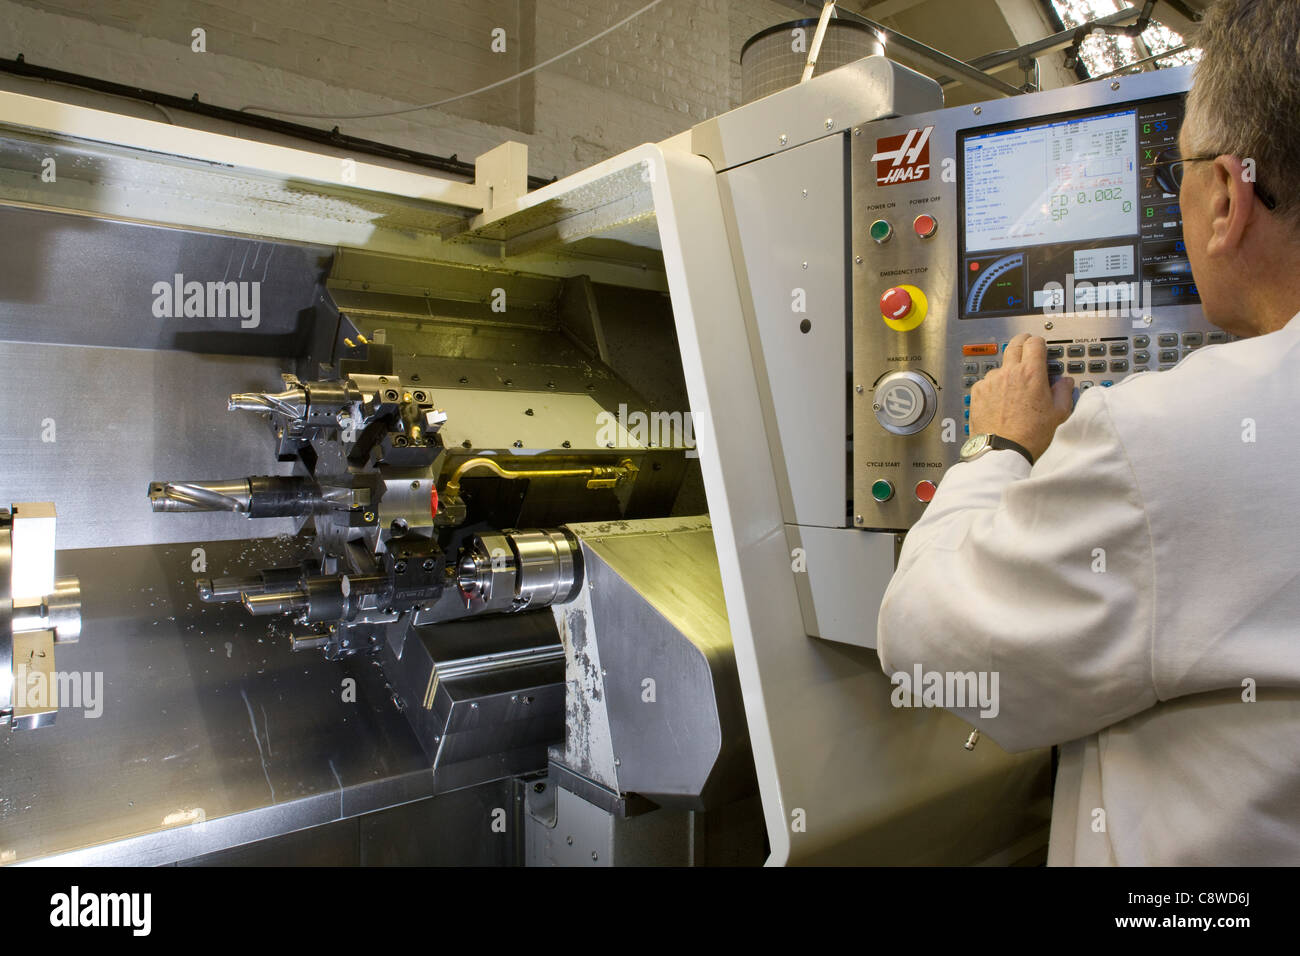 Engineer programs data onto a CNC lathe machine loaded with tools prior to machining Stock Photo